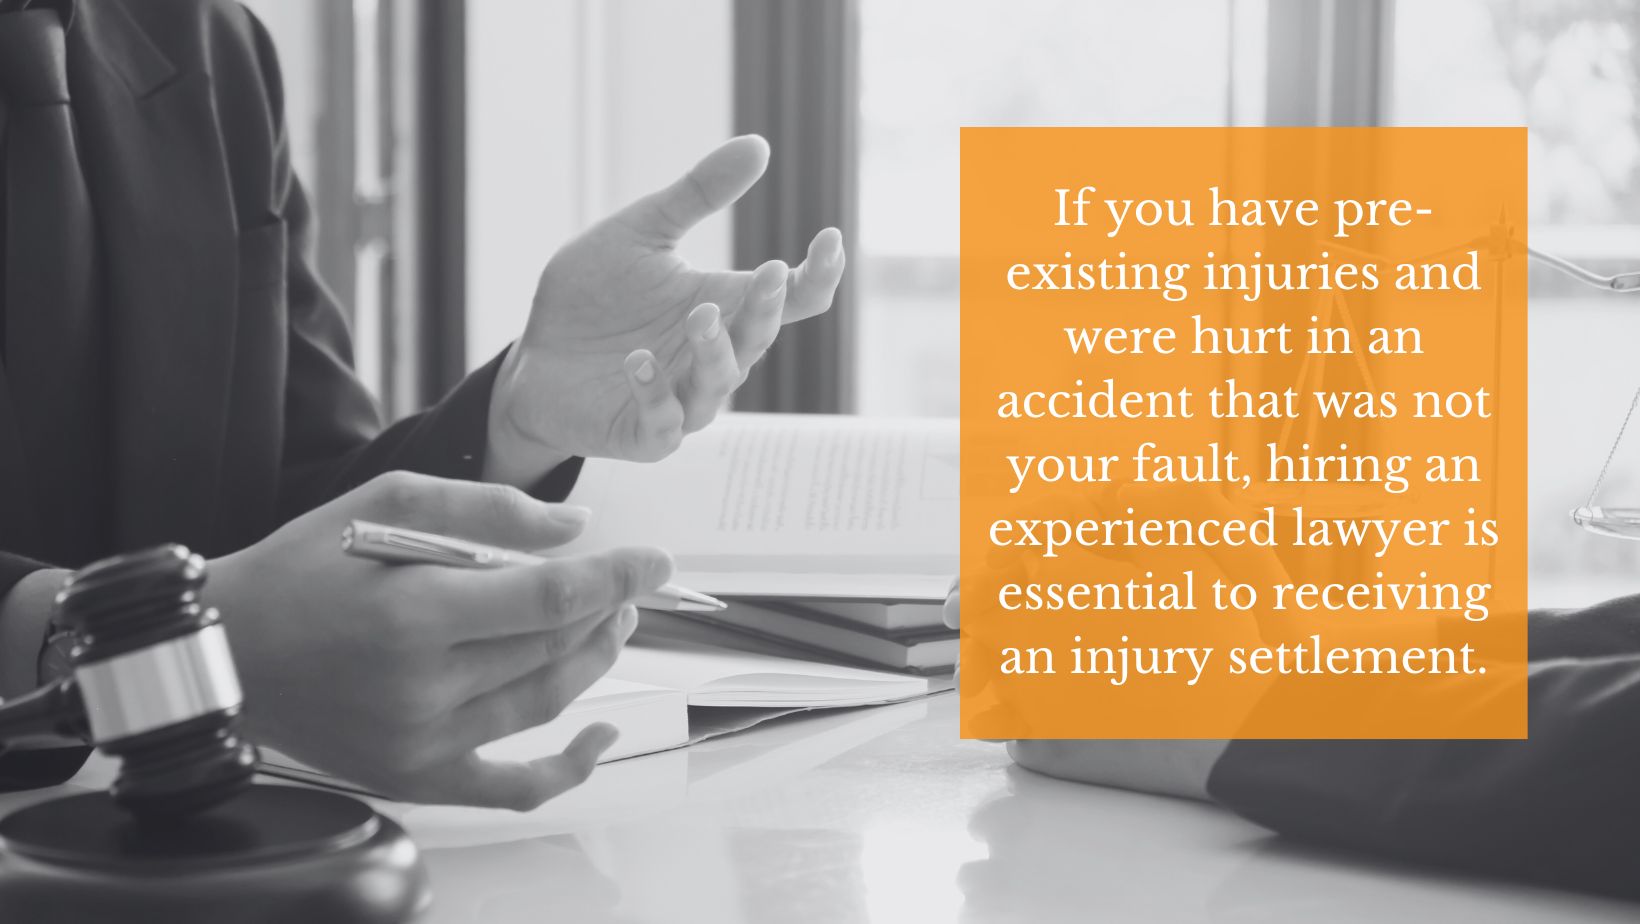 meeting with a lawyer over pre-existing injuries